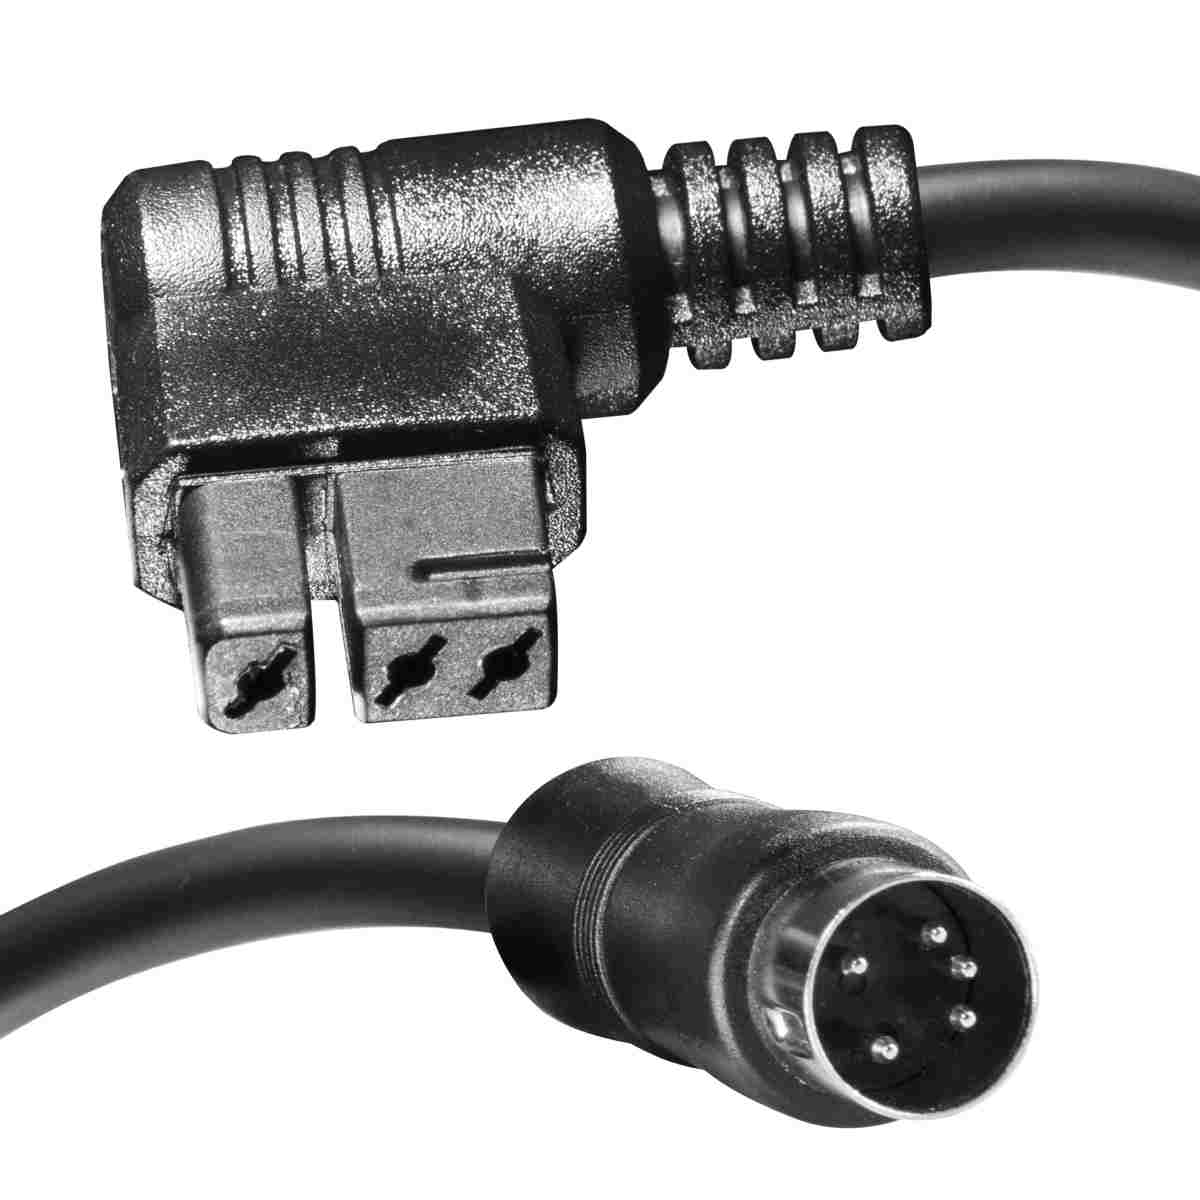 Walimex pro v2 flash cable for Lightshooter 5m